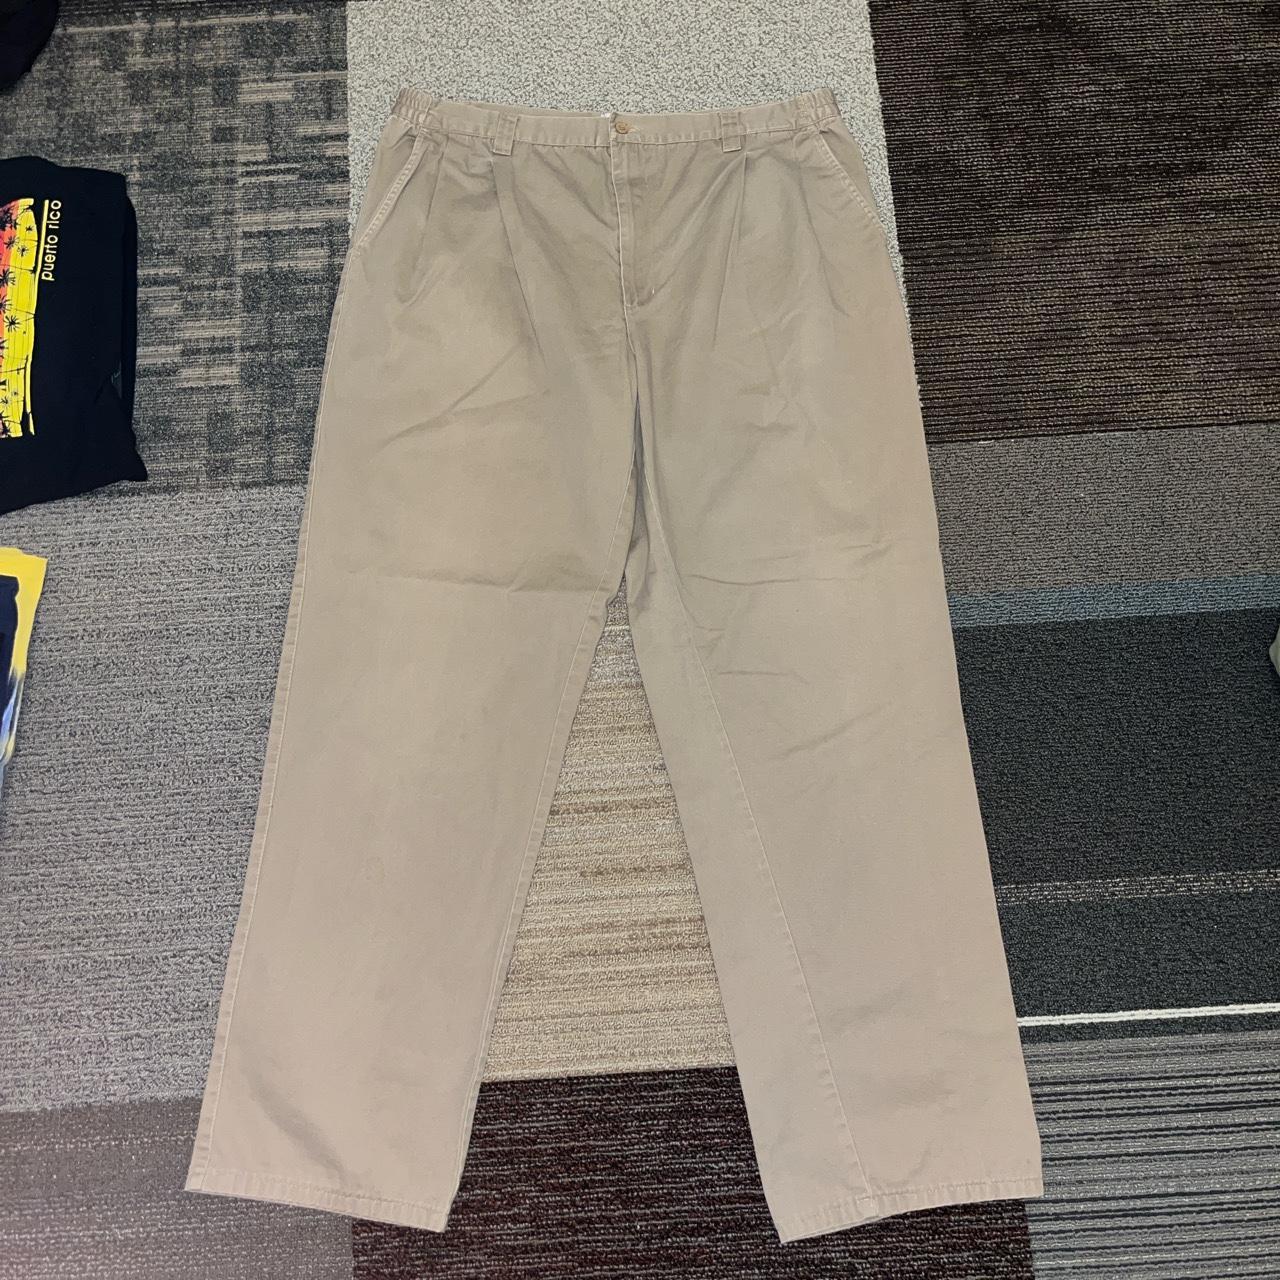 Baggy khaki pants open to offers dm me if you have... - Depop